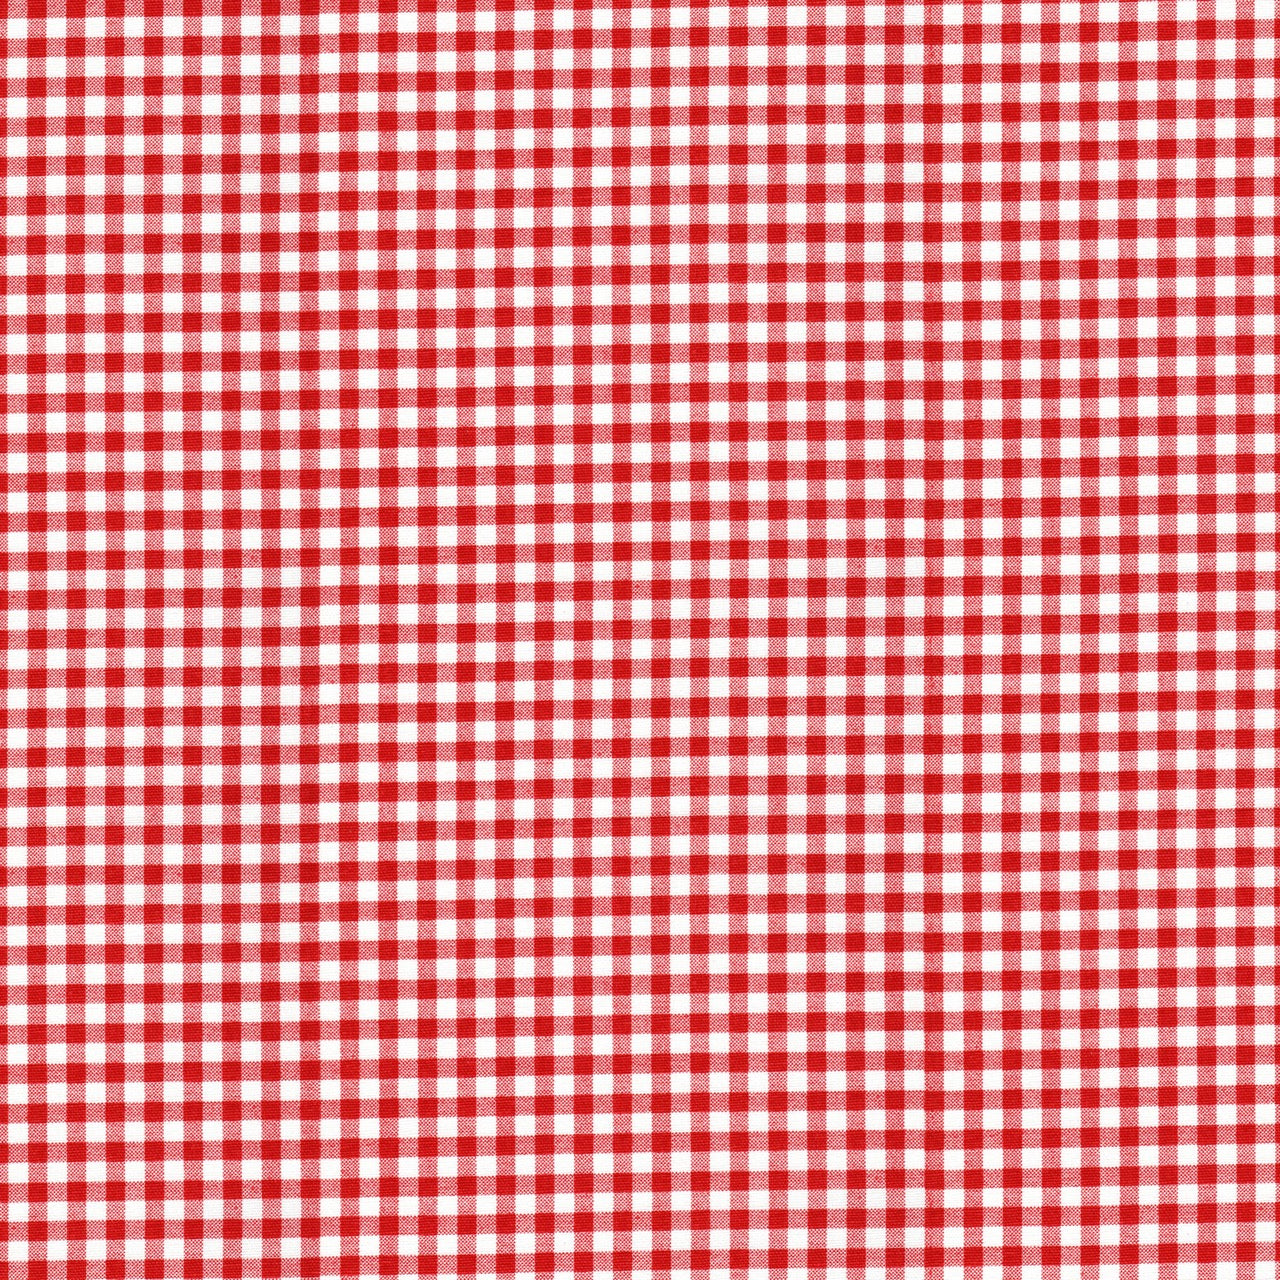 Scalloped Valance in Lipstick Red Large Gingham Check on White